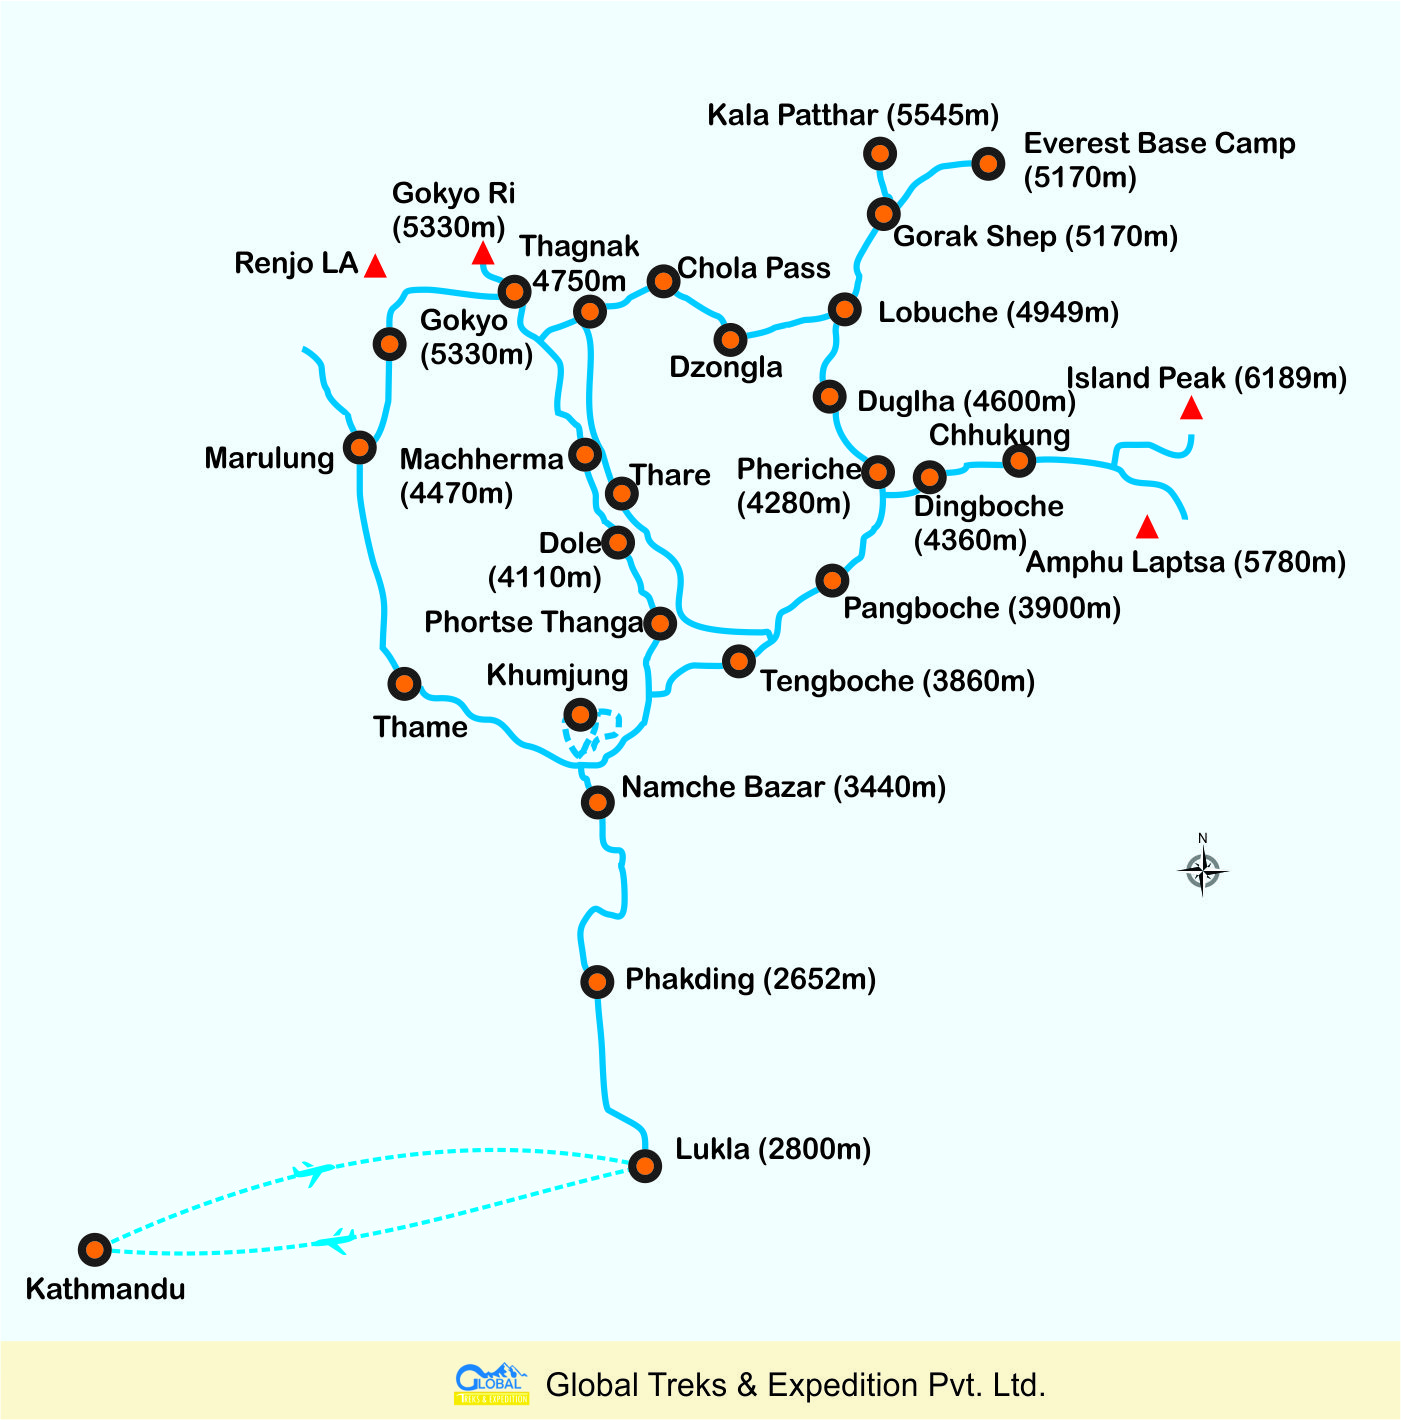 Map of Everest Base Camp Chola Pass